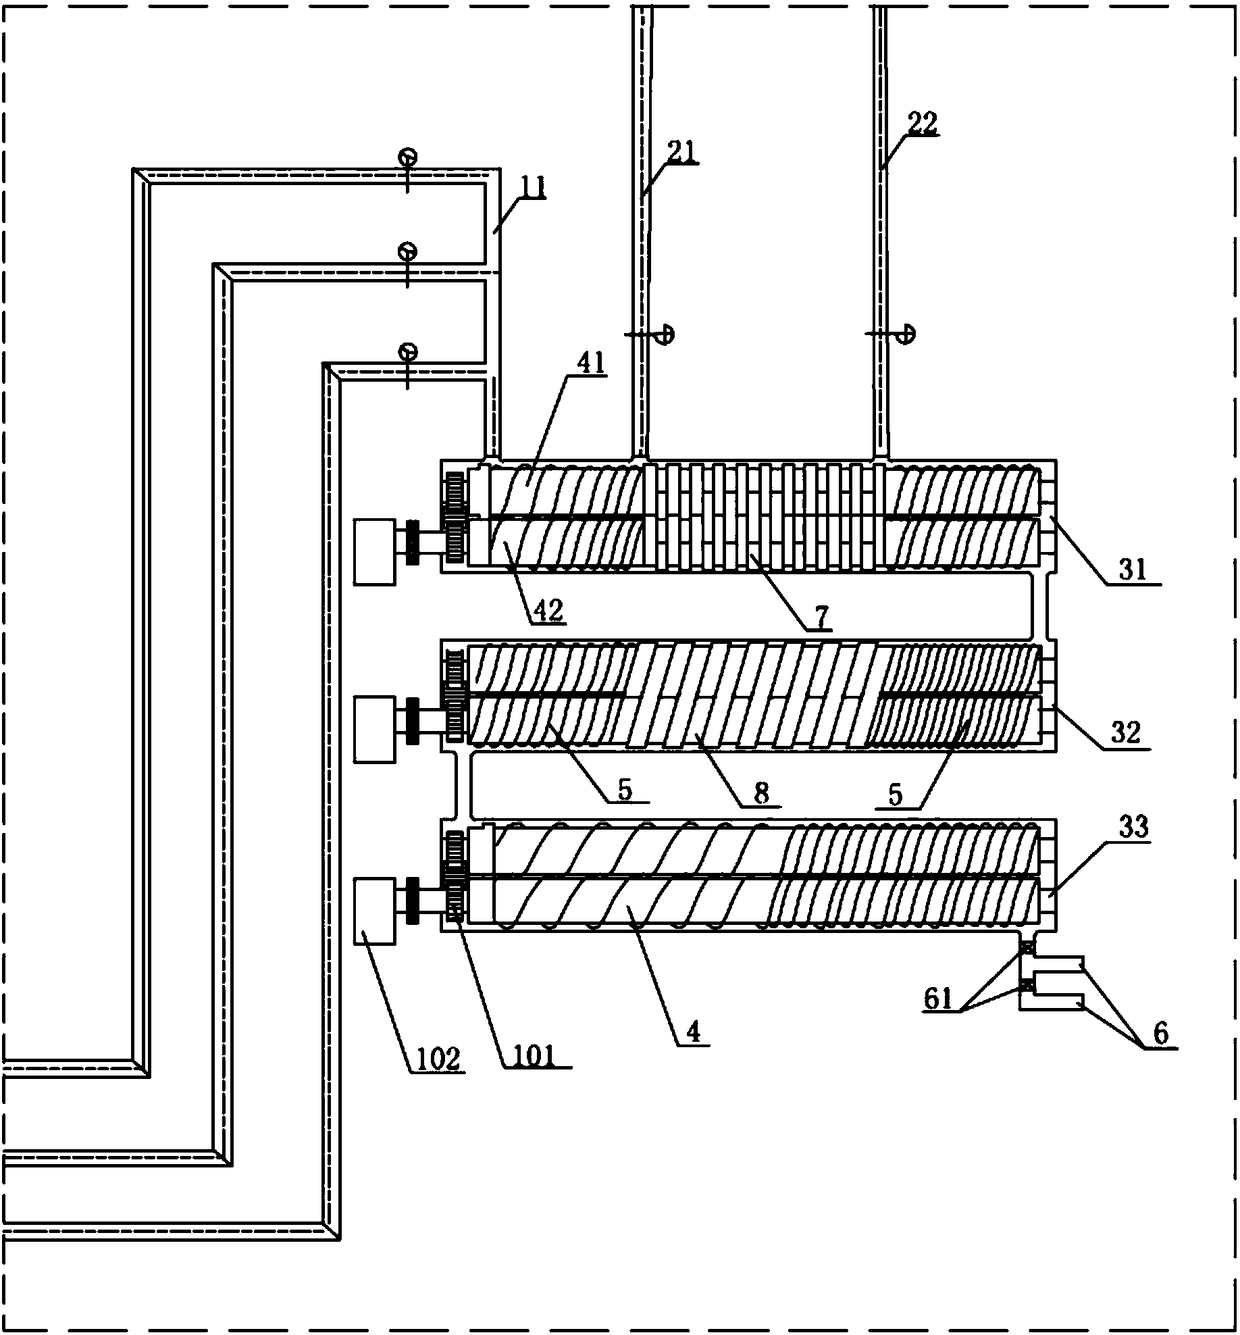 Electrode material production and processing system based on double screws